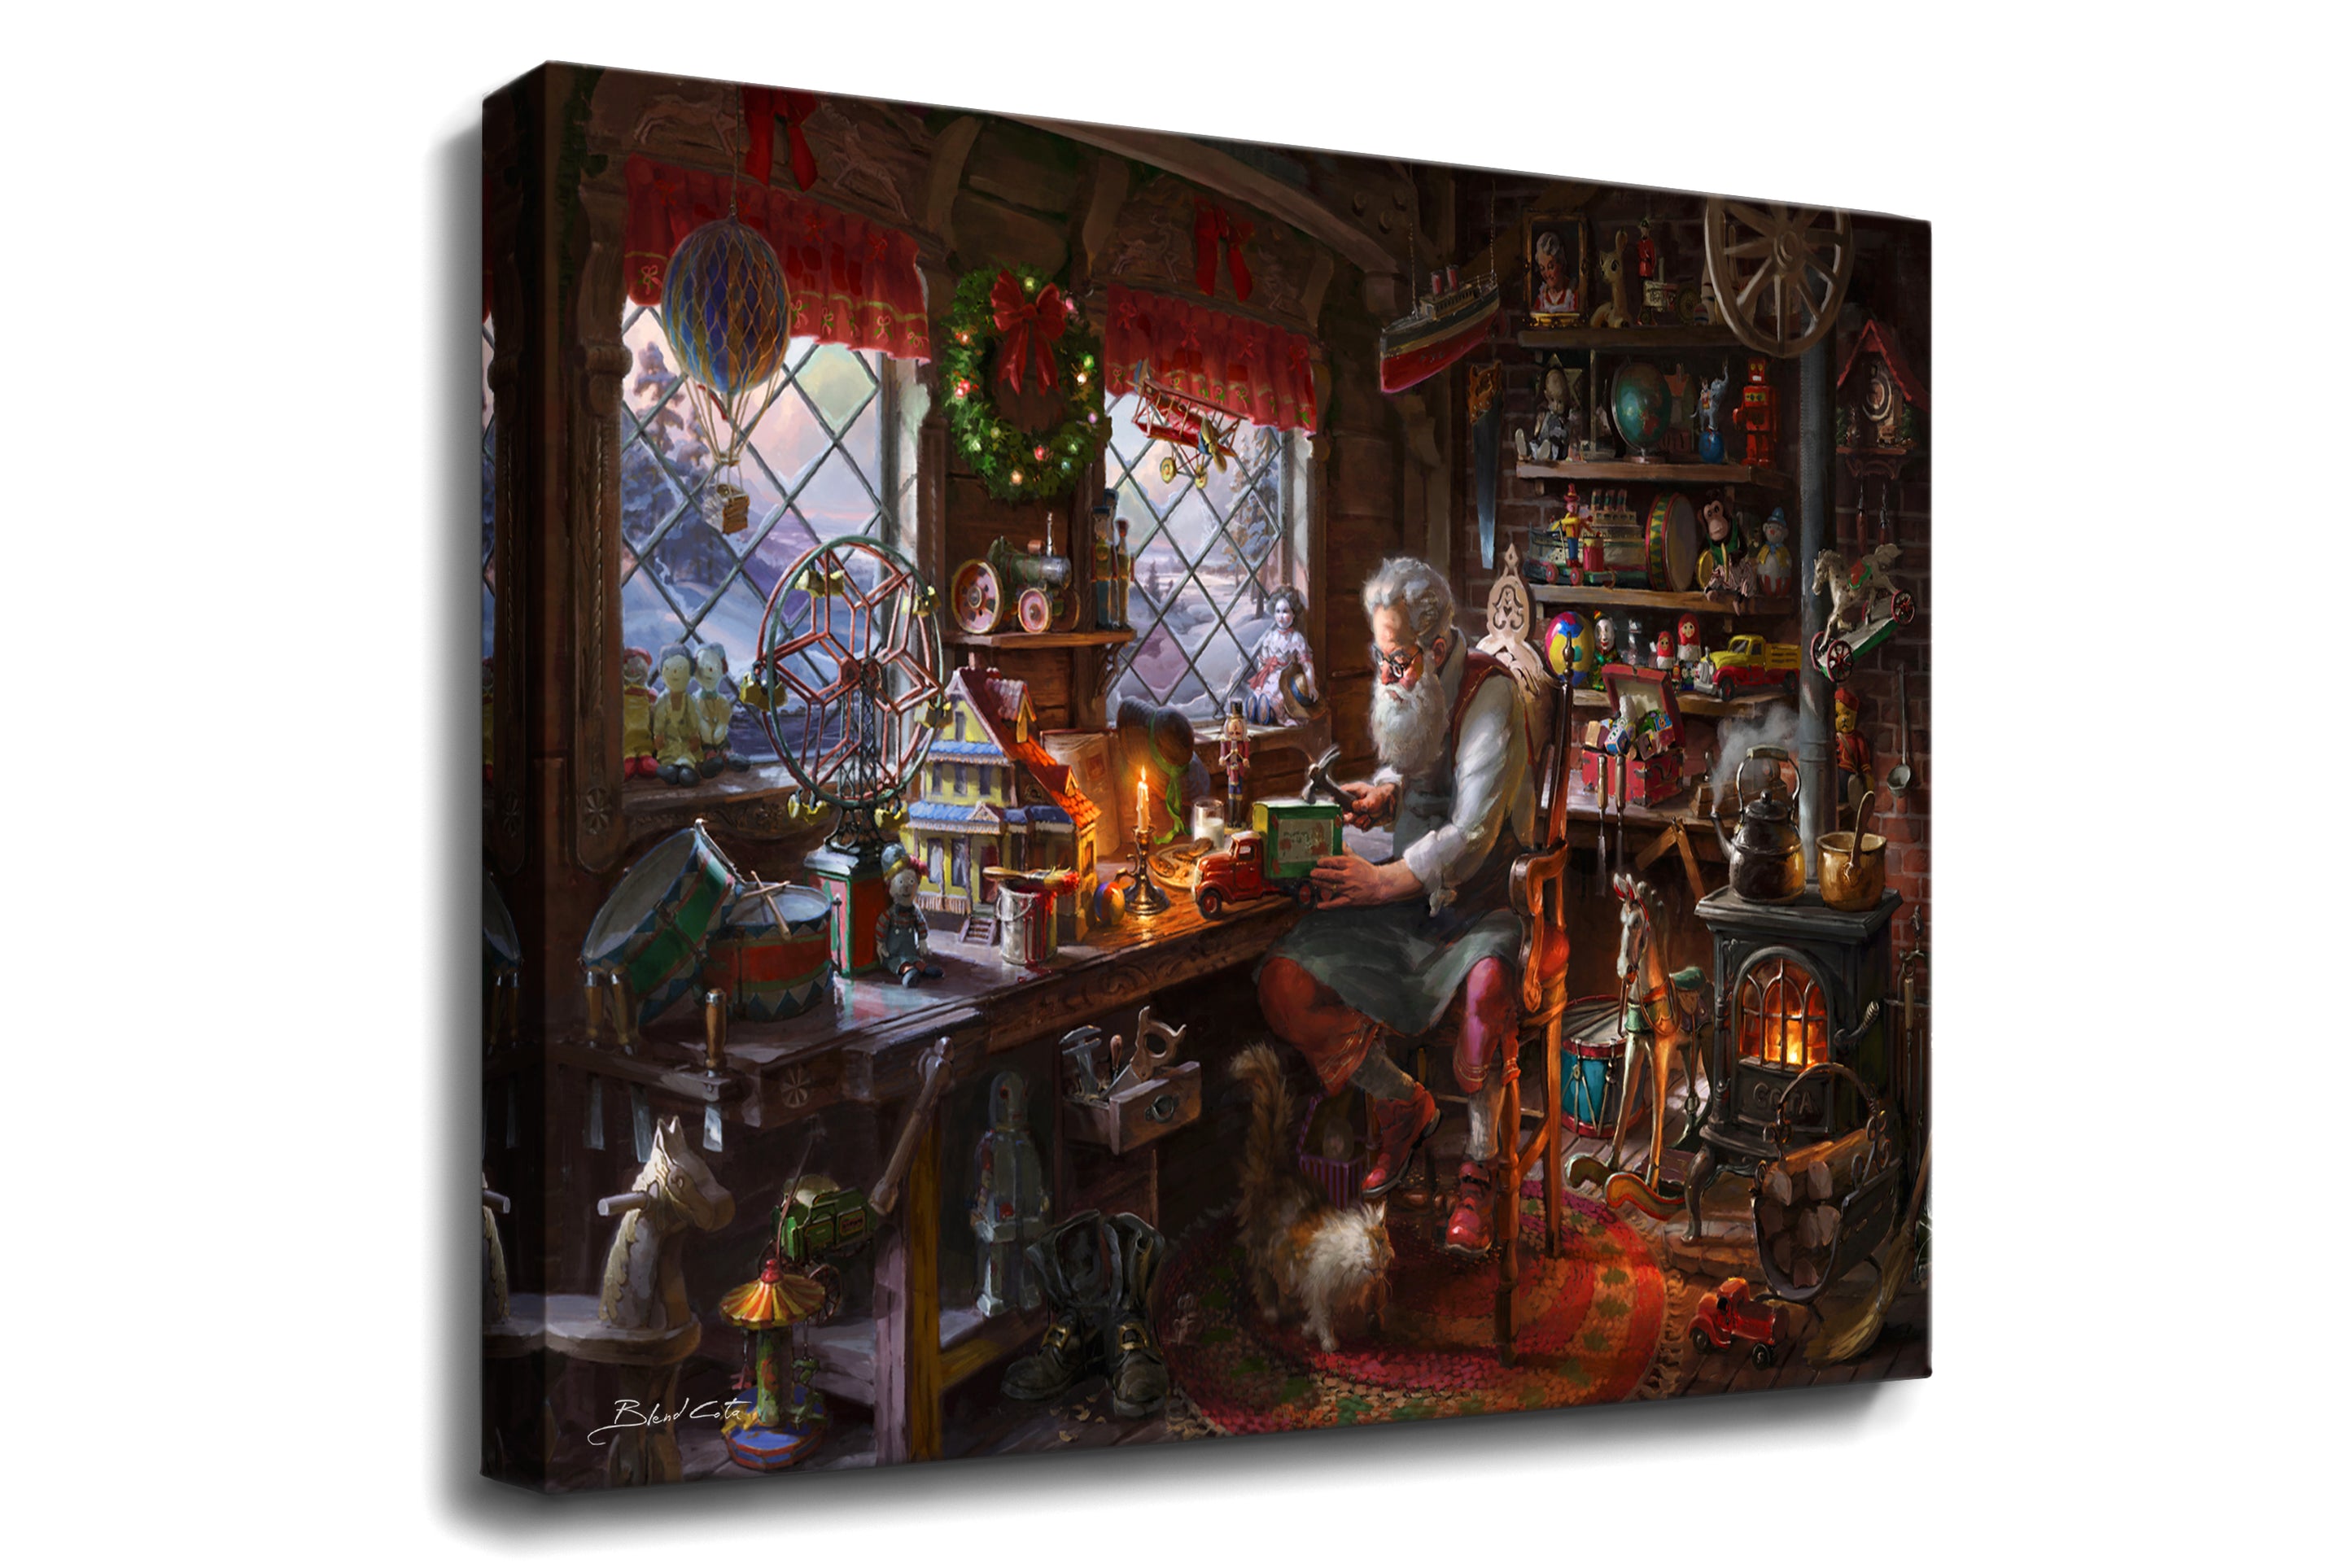 An art print on gallery wrapped canvas of the painting of Santa claus making toys in his workshop  during christmas with a cat by his boots and wood burning stove amongst the many children's toys.